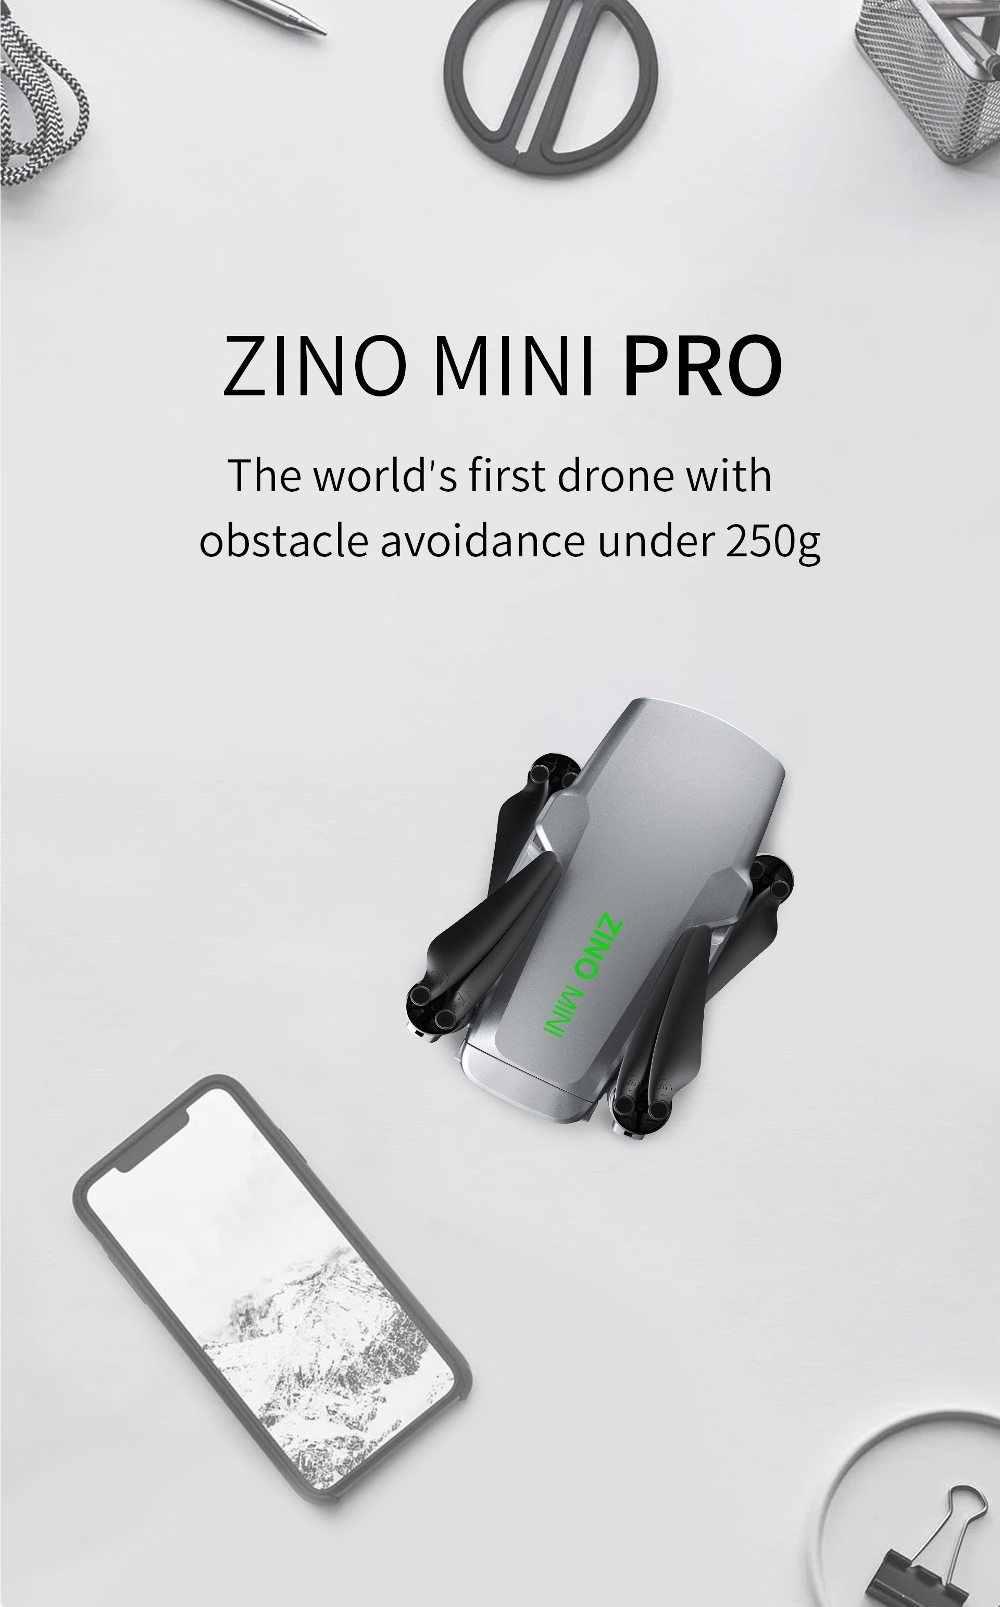 Hubsan ZINO Mini PRO 249g GPS 10KM FPV with 4K 30fps Camera 3-axis Gimbal 3D Obstacle Sensing 40mins Flight Time RC Drone Quadcopter RTF